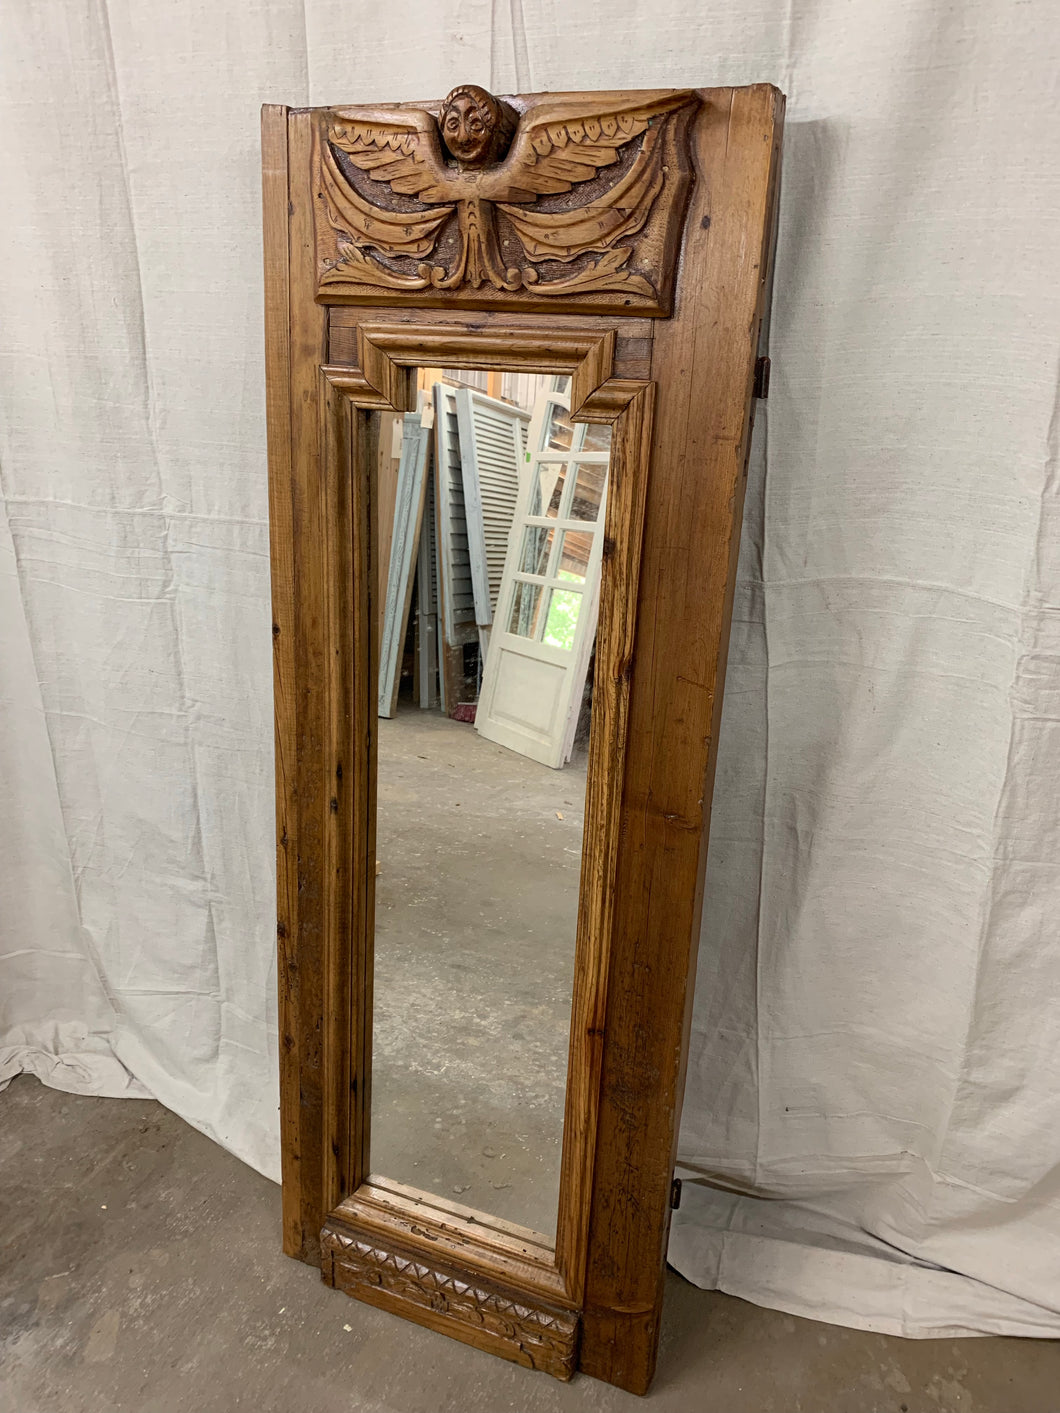 Mirror made from French Door Top